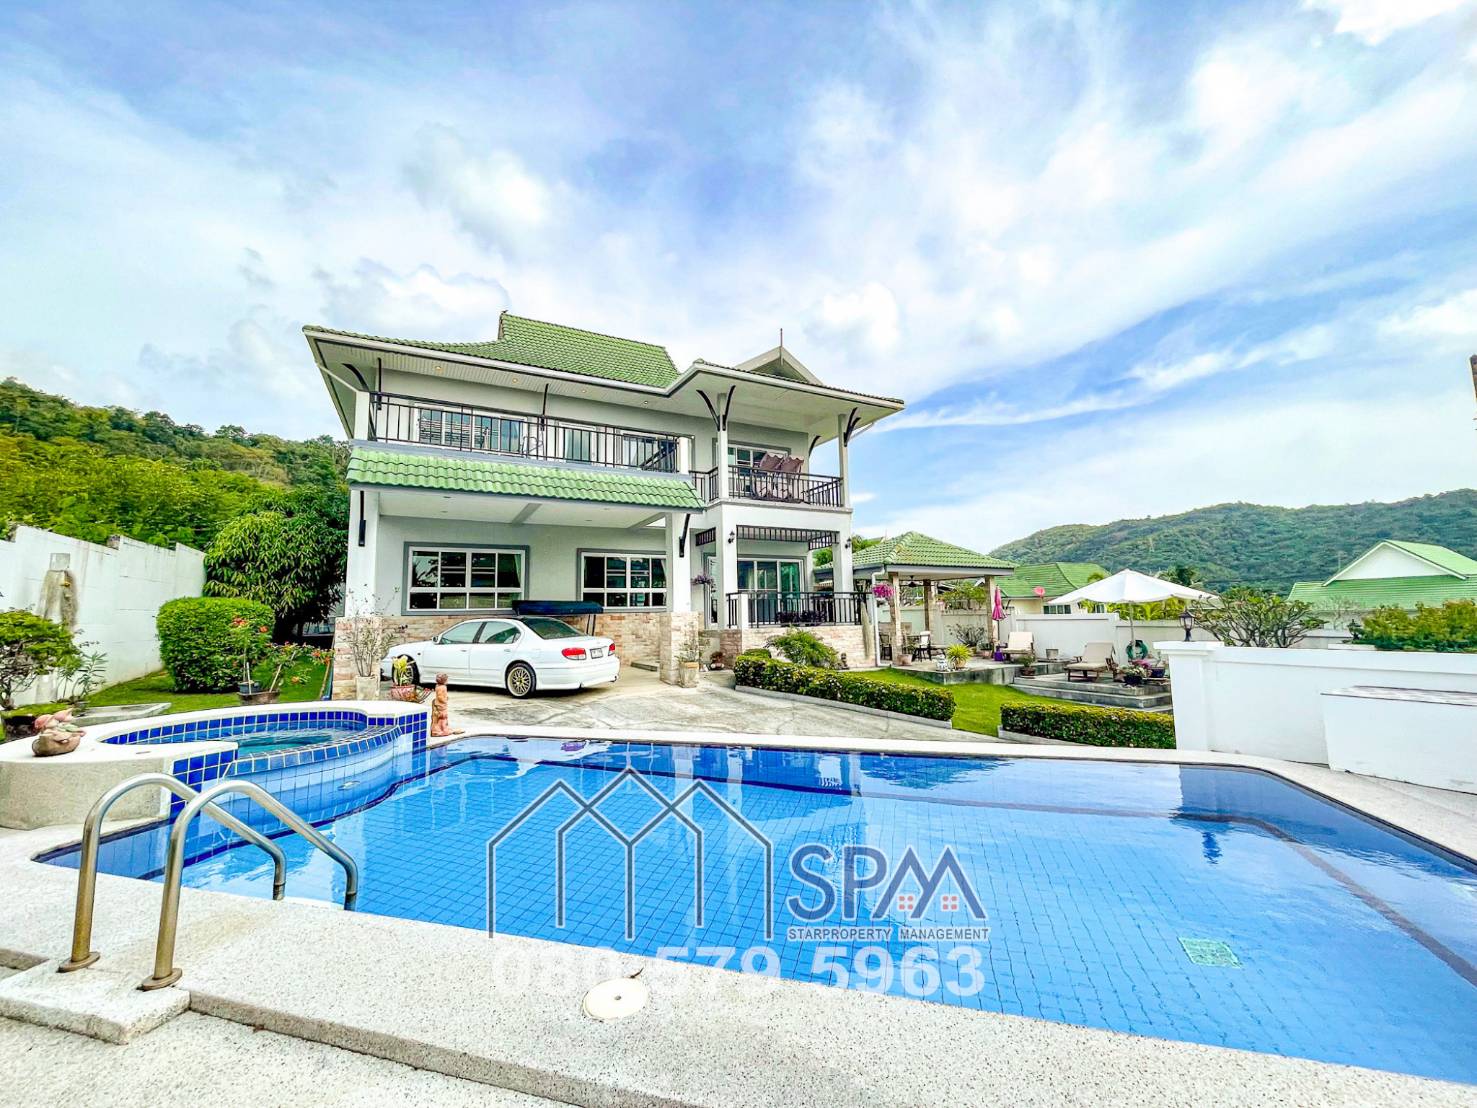 4 Bedrooms Two storey house private swimming pool, near mountain at Hauhin View for sale , price 6.79 M Baht